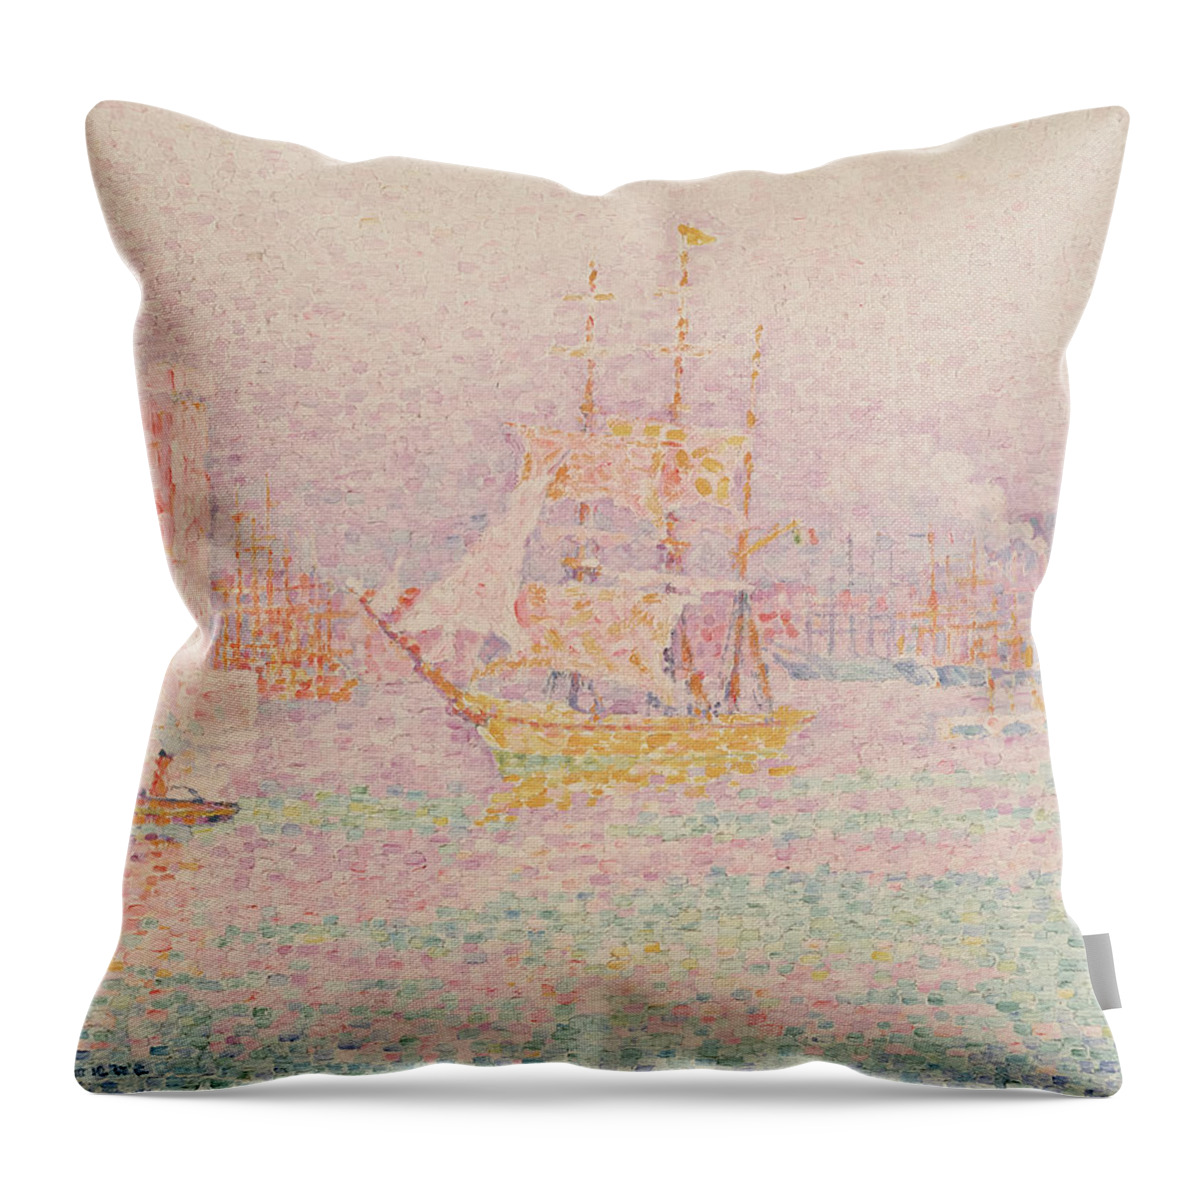 Painting Throw Pillow featuring the painting Marseille Harbor by Paul Signac by Mango Art